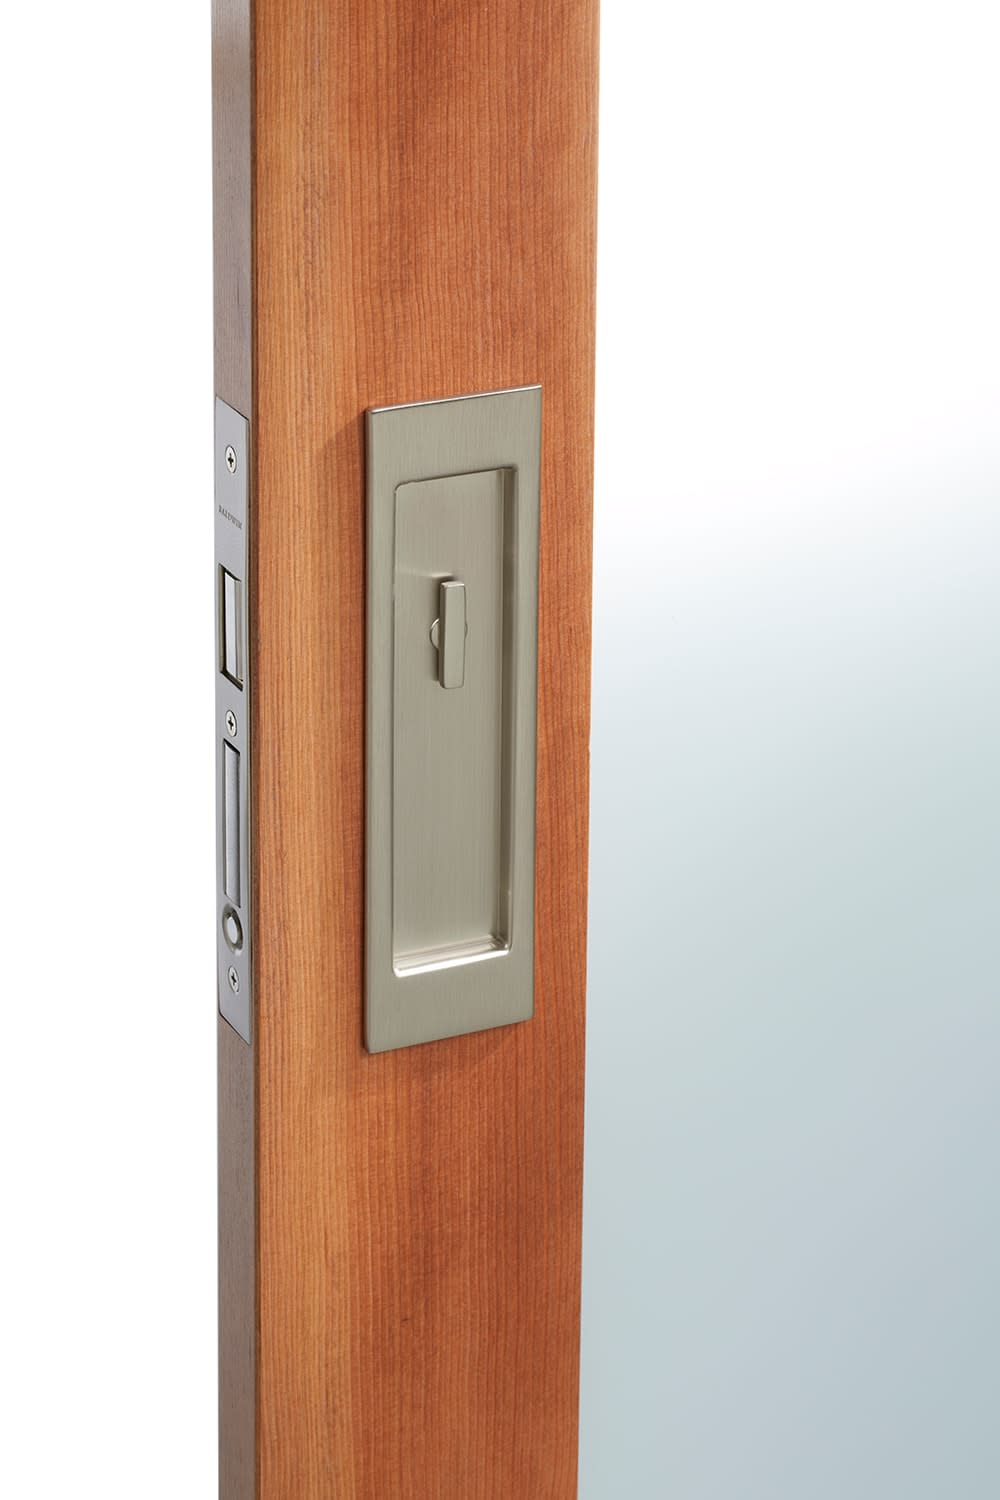 Baldwin Pd005.Priv Santa Monica Privacy Pocket Door Lock From The Estate Collection - - image 4 of 7